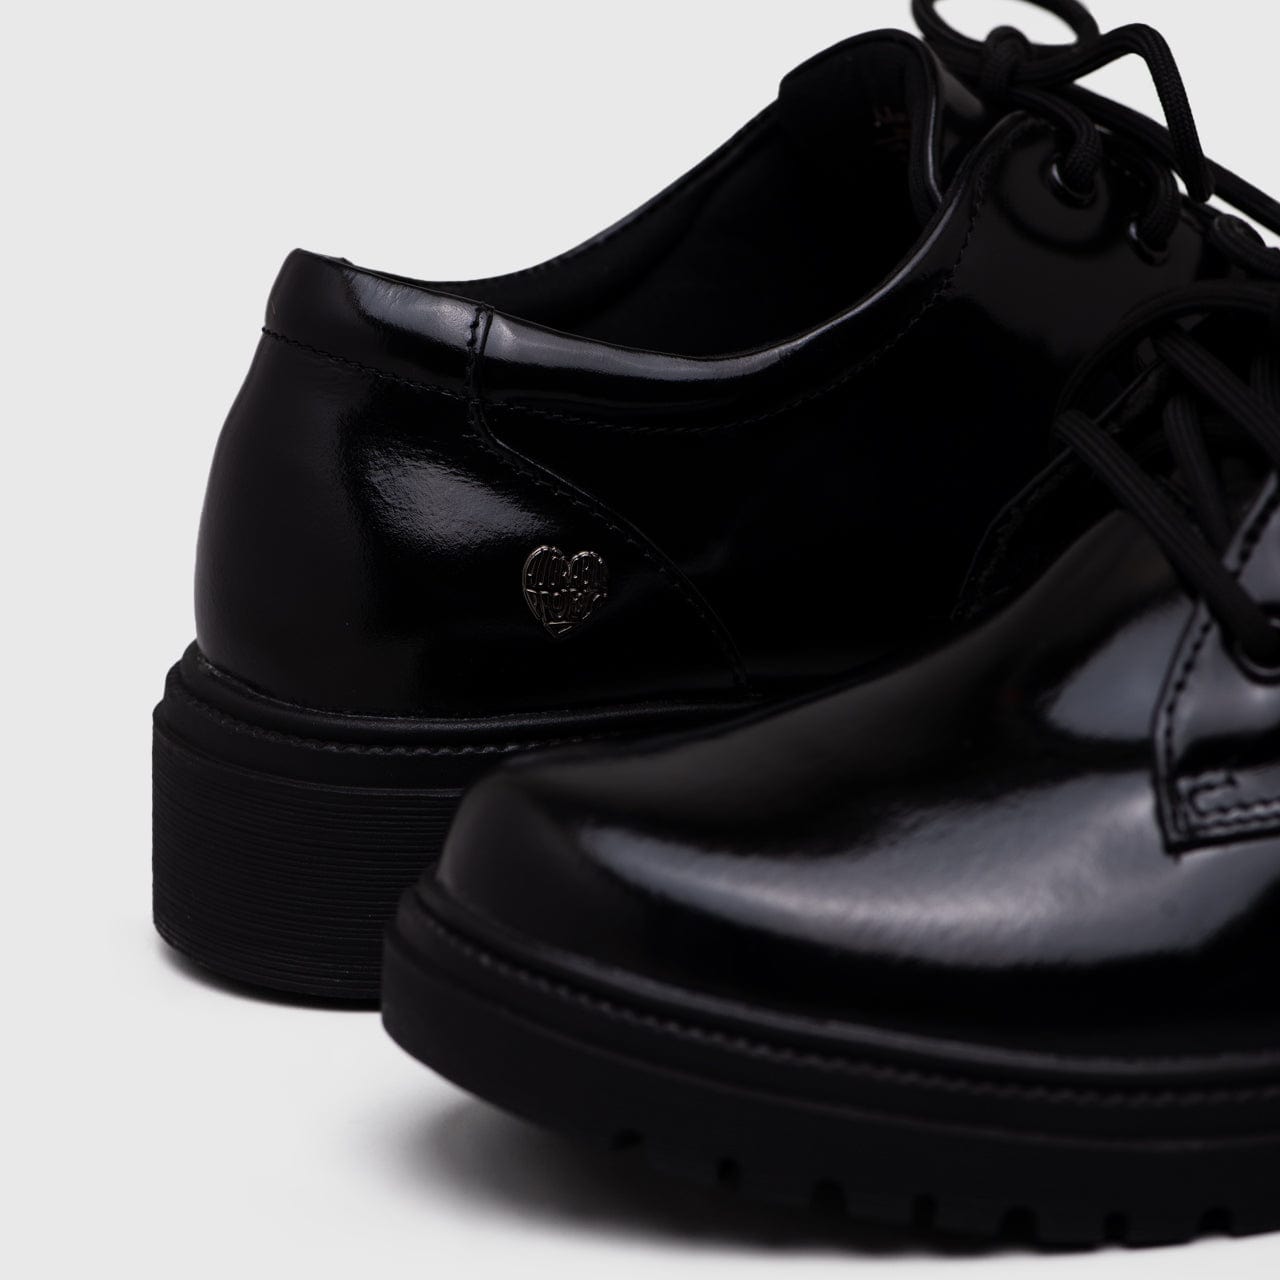 Adorable Projects-Dev Oxford Vailey Oxford Black